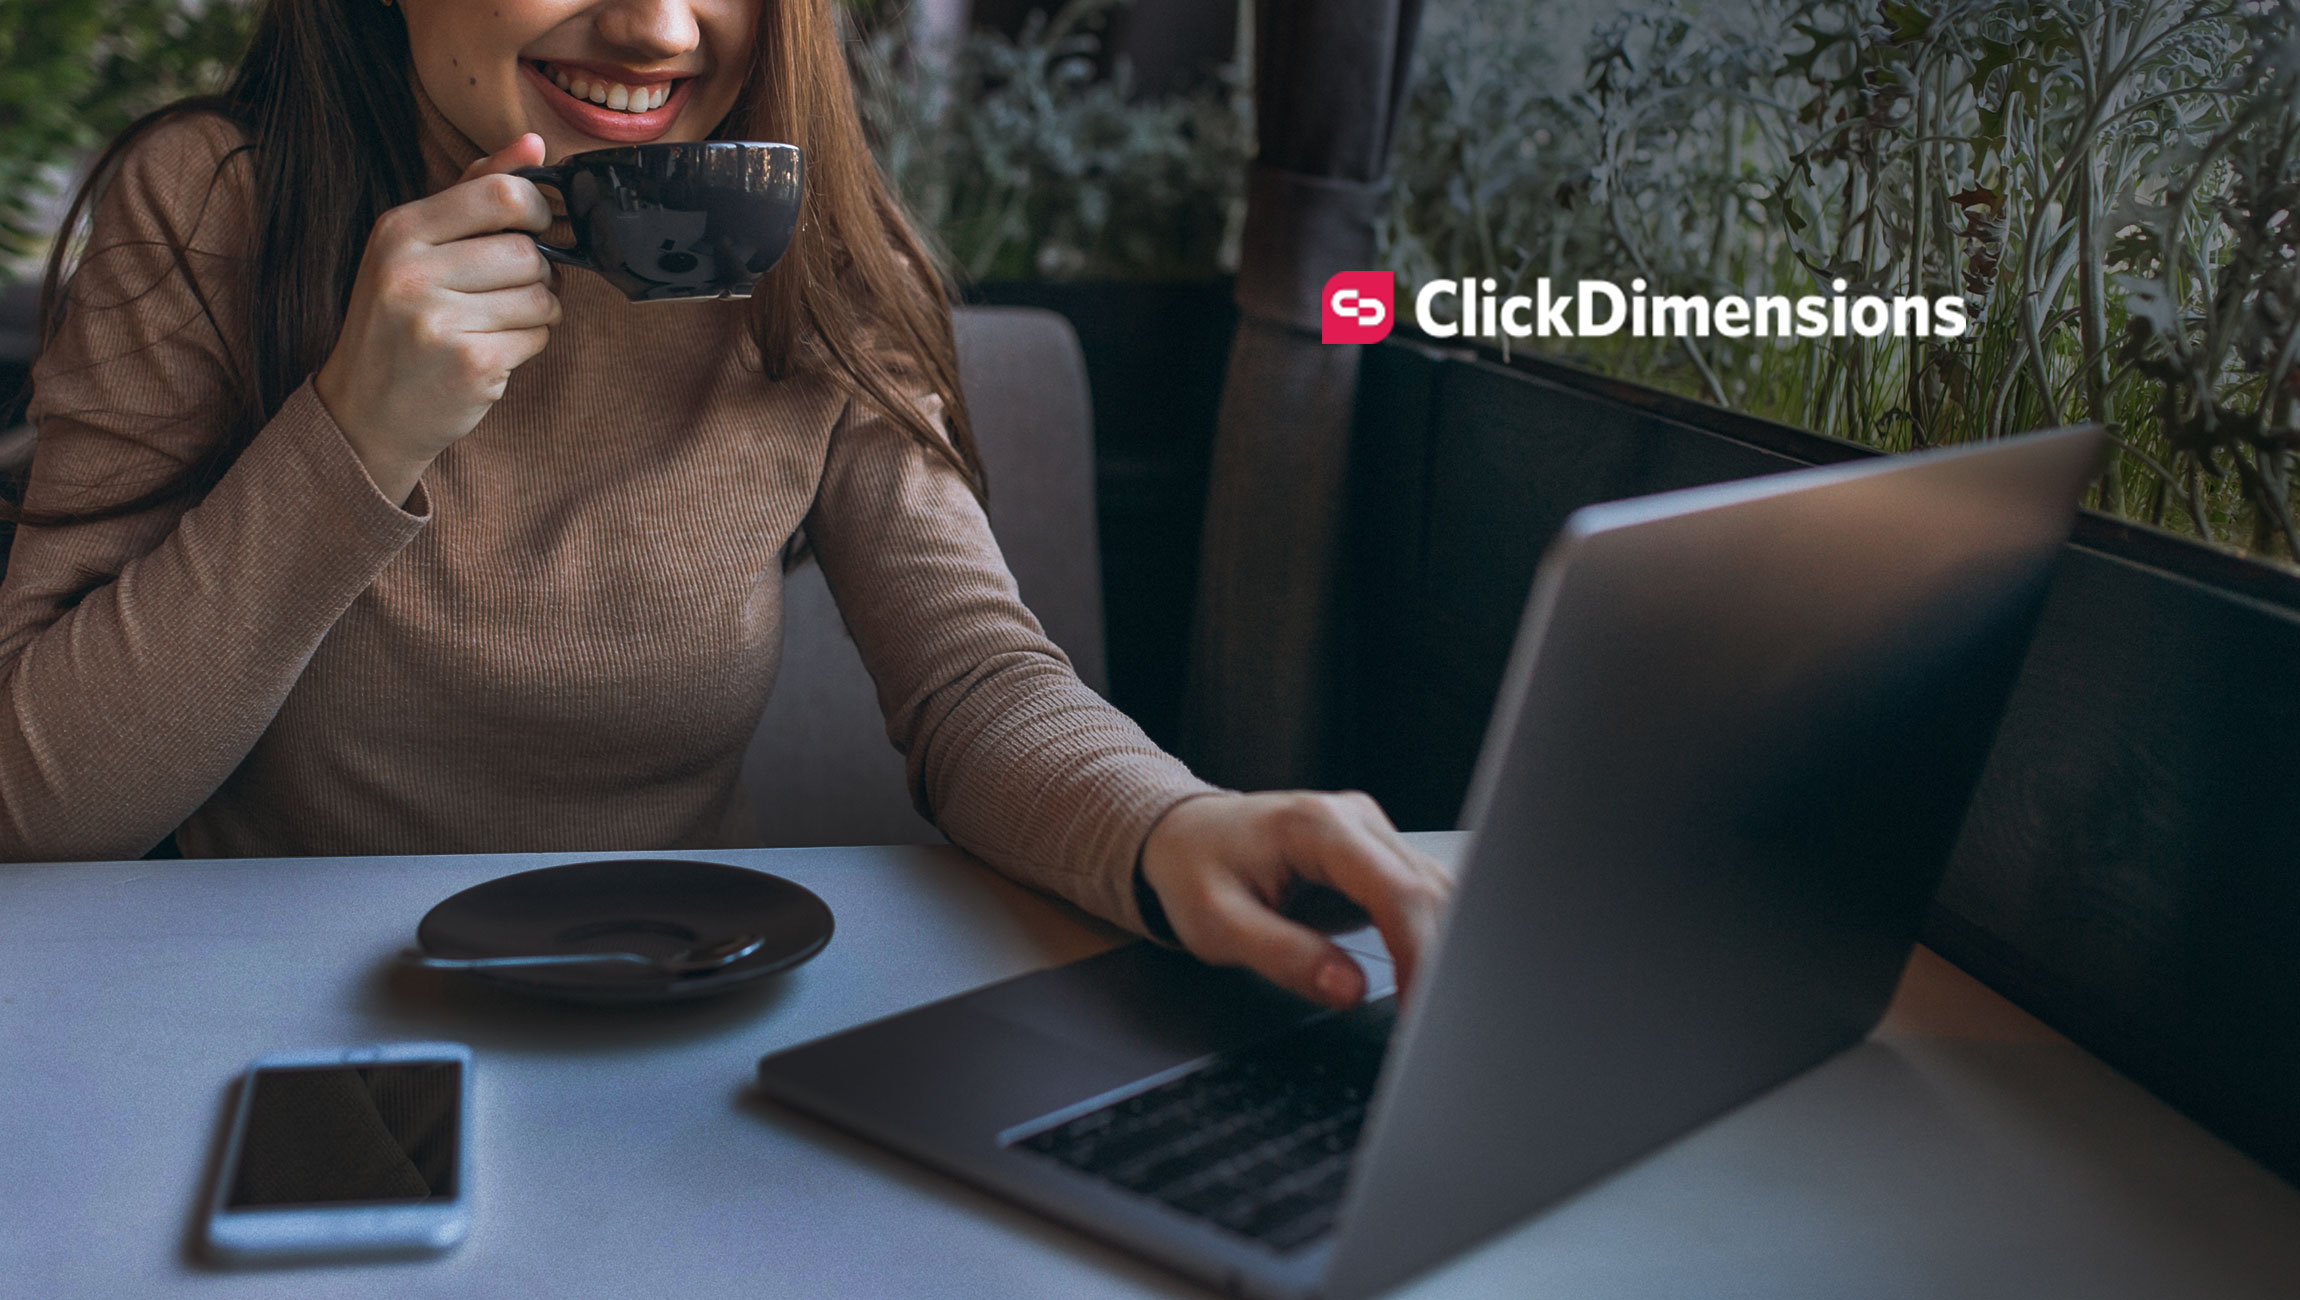 ClickDimensions Launches Sales Engagement Platform to Unify Sales and Marketing Teams